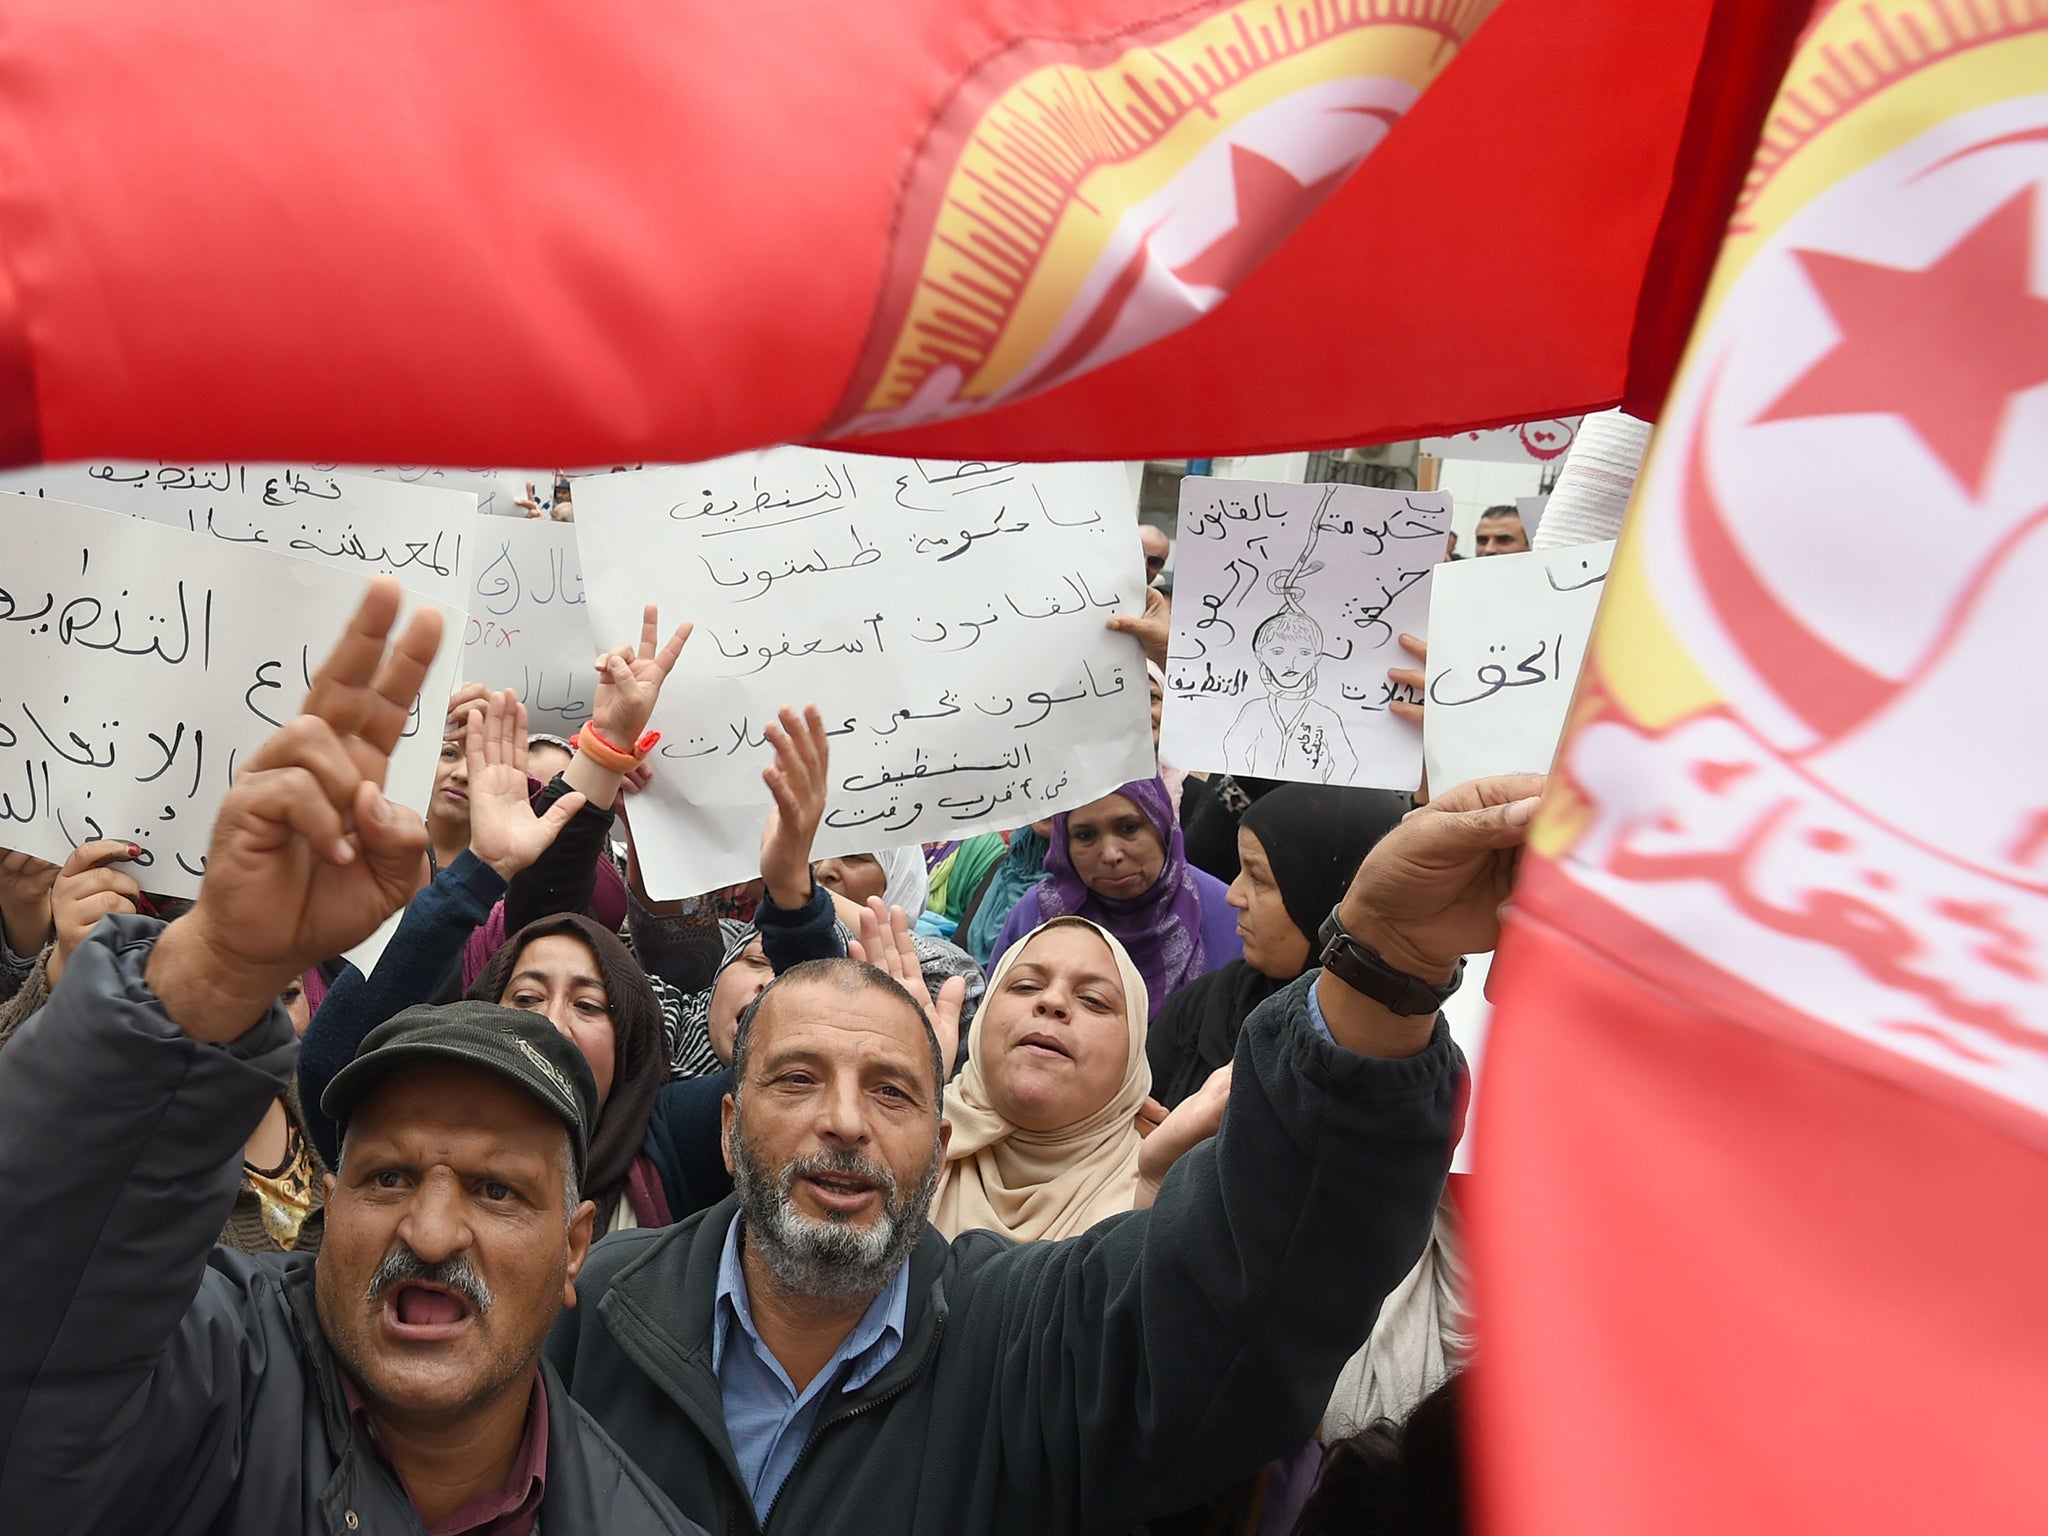 Tunisian demonstrators stage a sit-in in front of the headquarters of the Tunisian General Labour Union office in Tunis on 31 October. They are demanding an increase in the wages of private sector workers